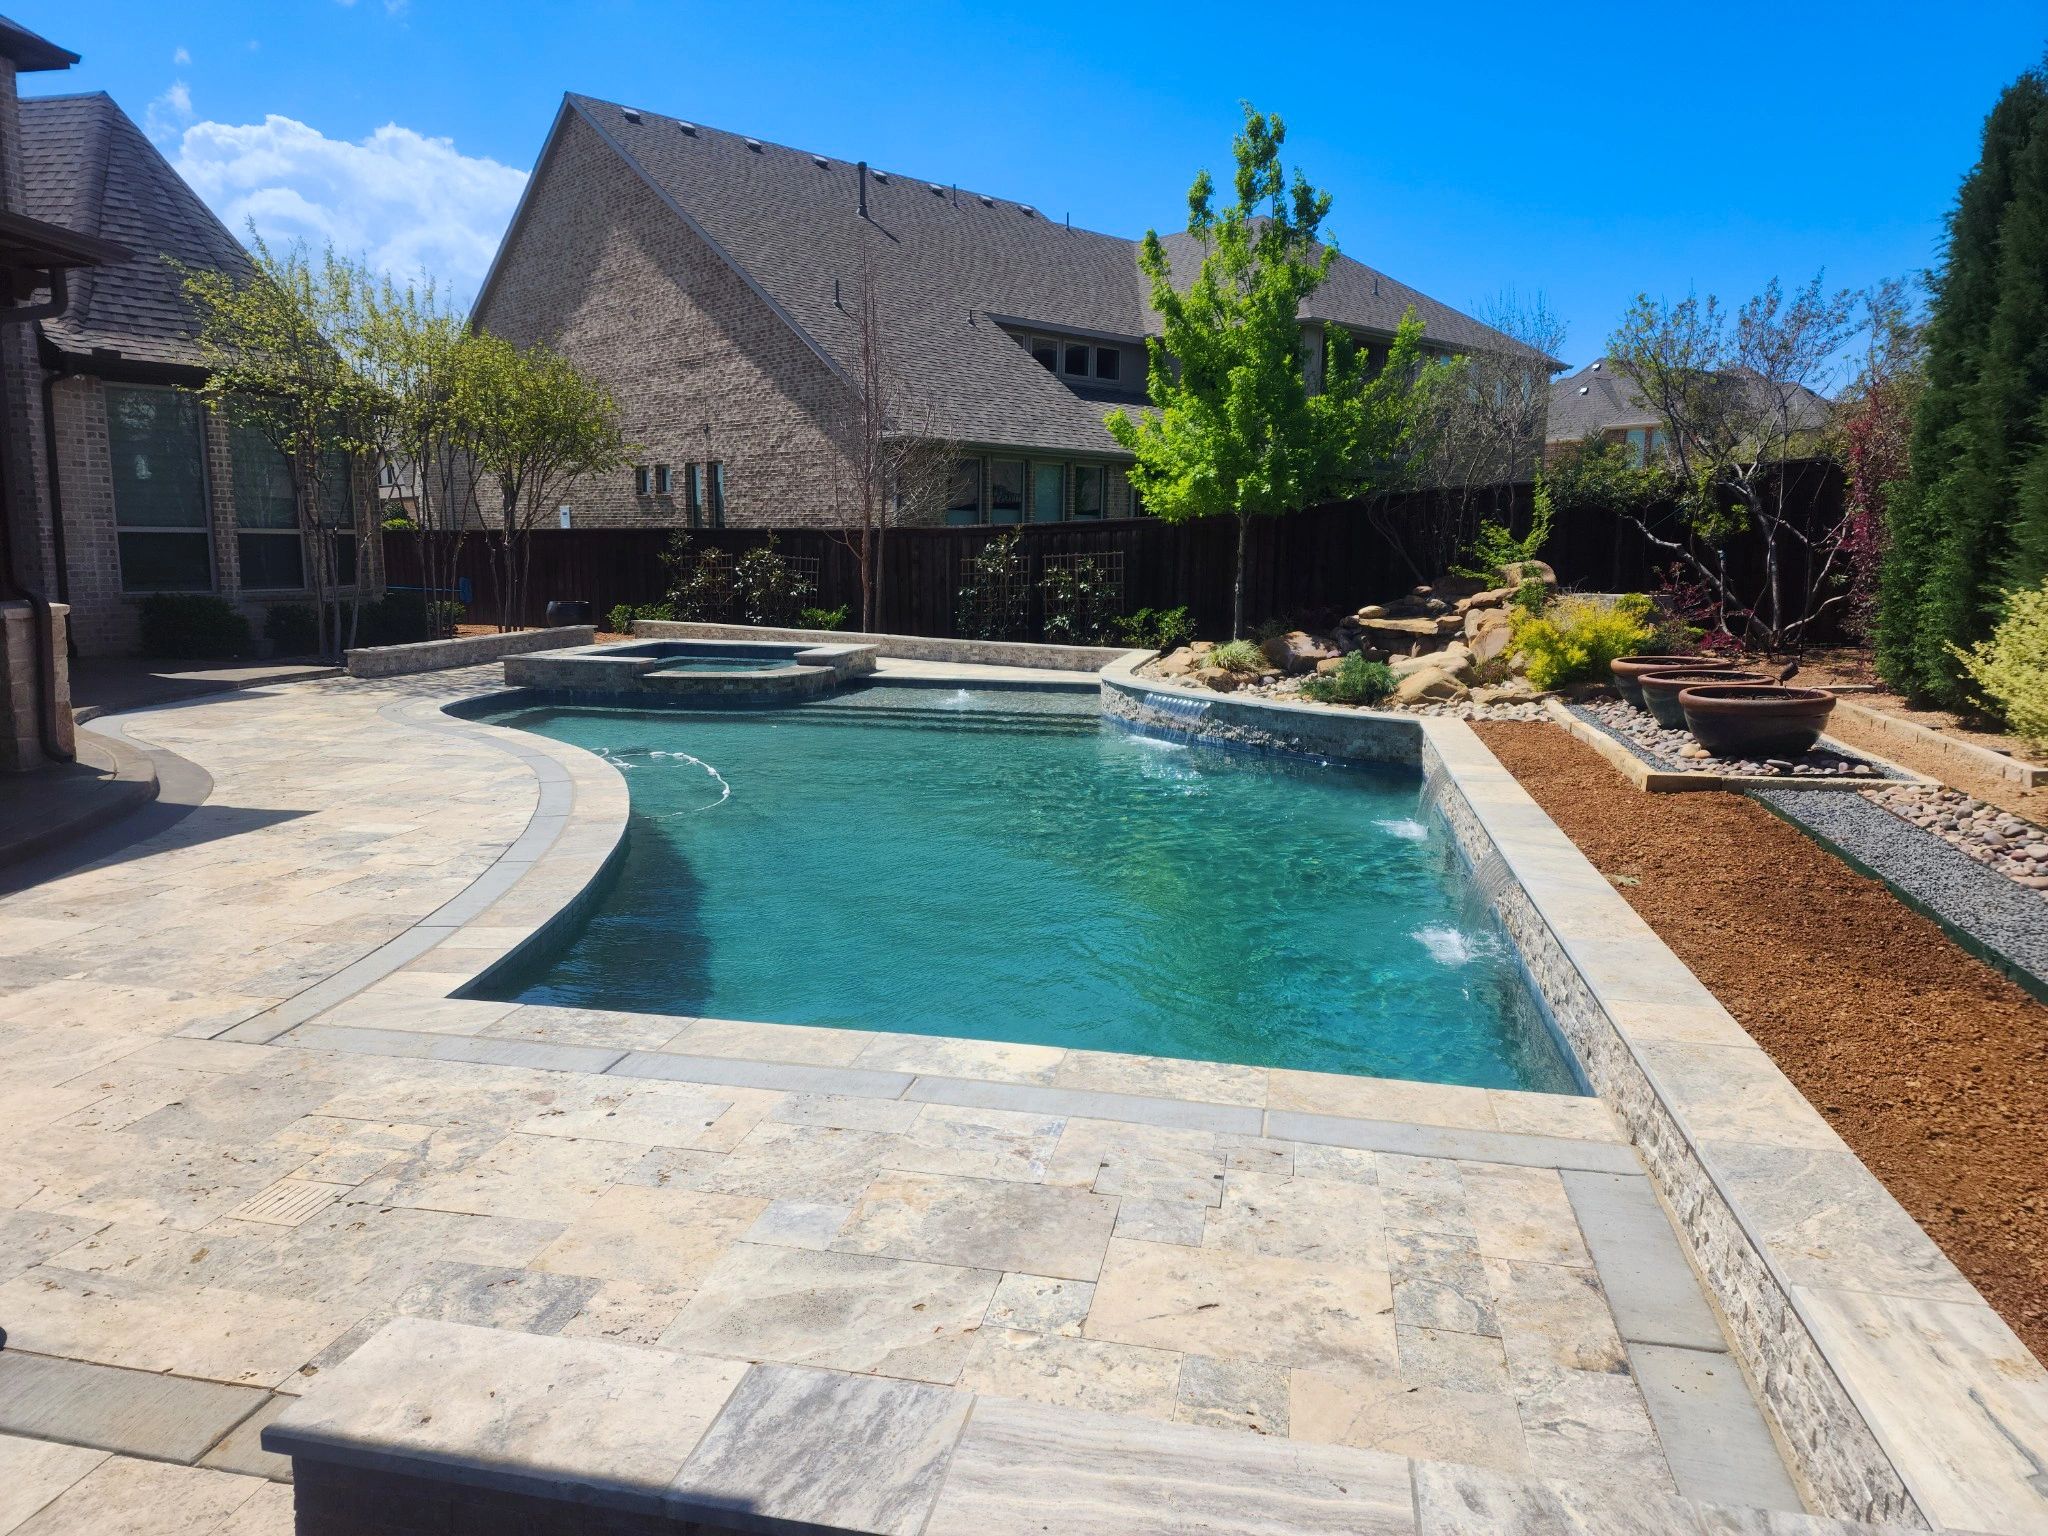 dallas richardson build a new pool 5 Dallas Pool Builders: Transforming Dreams into Reality with Integrity Pools